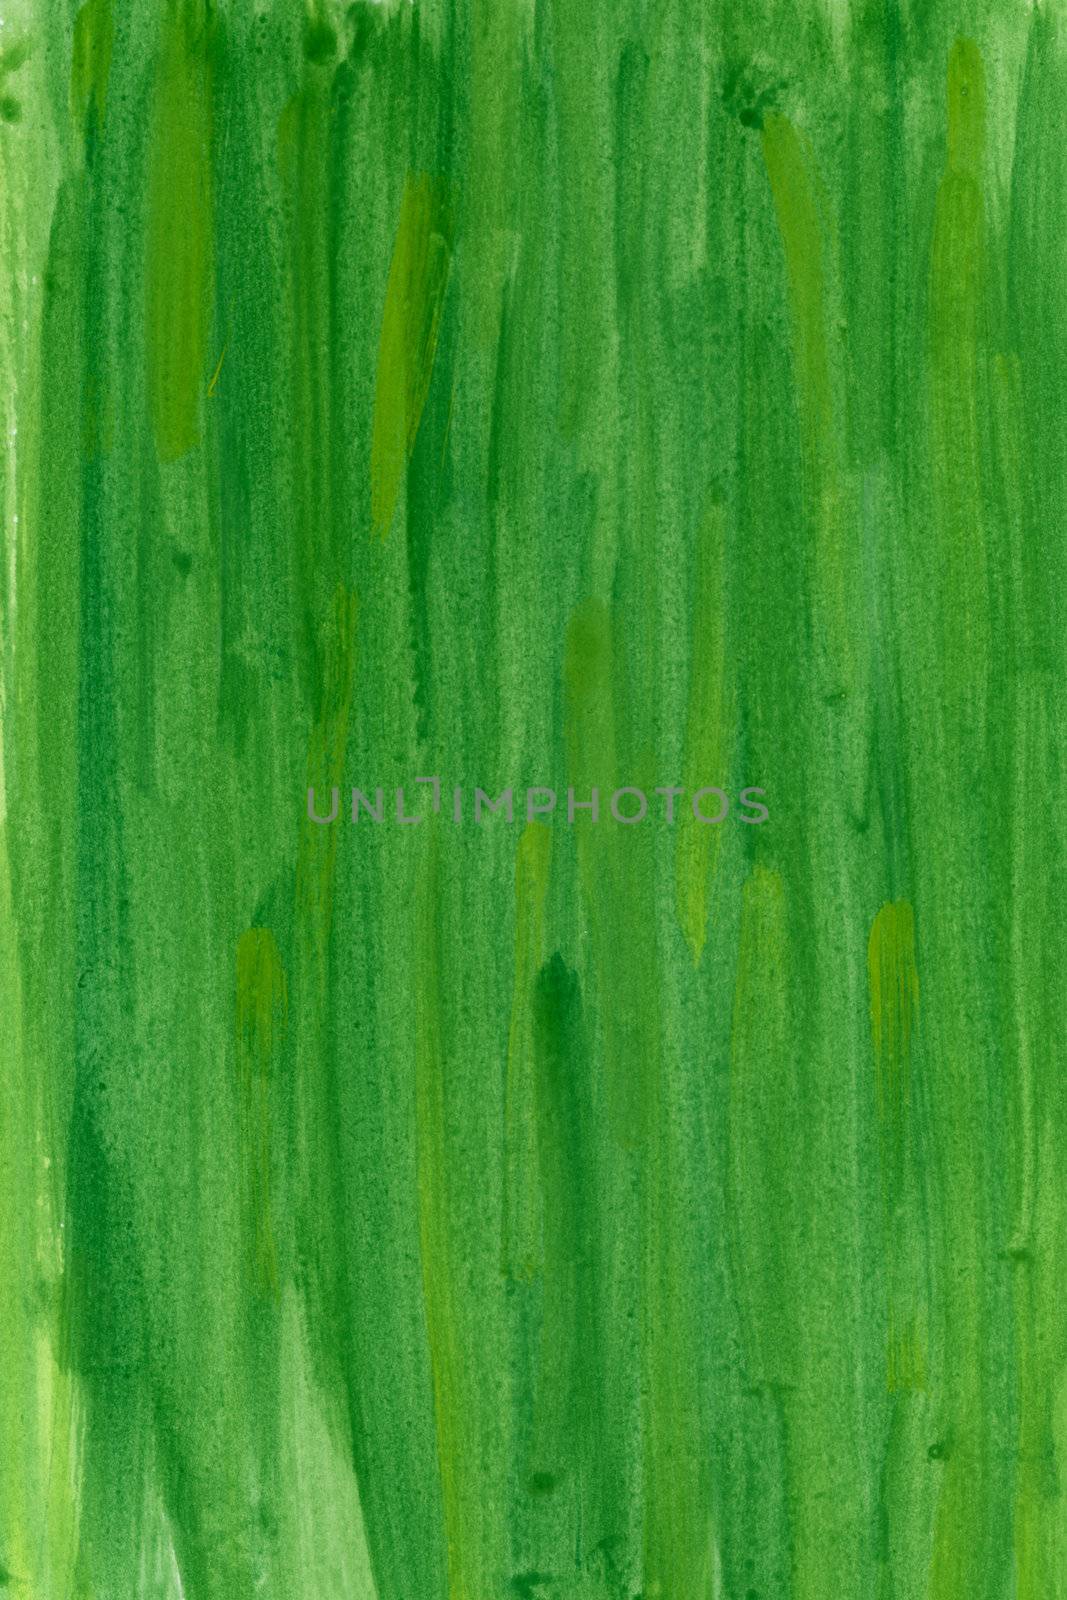 green watercolor background painted with vertical brush strokes